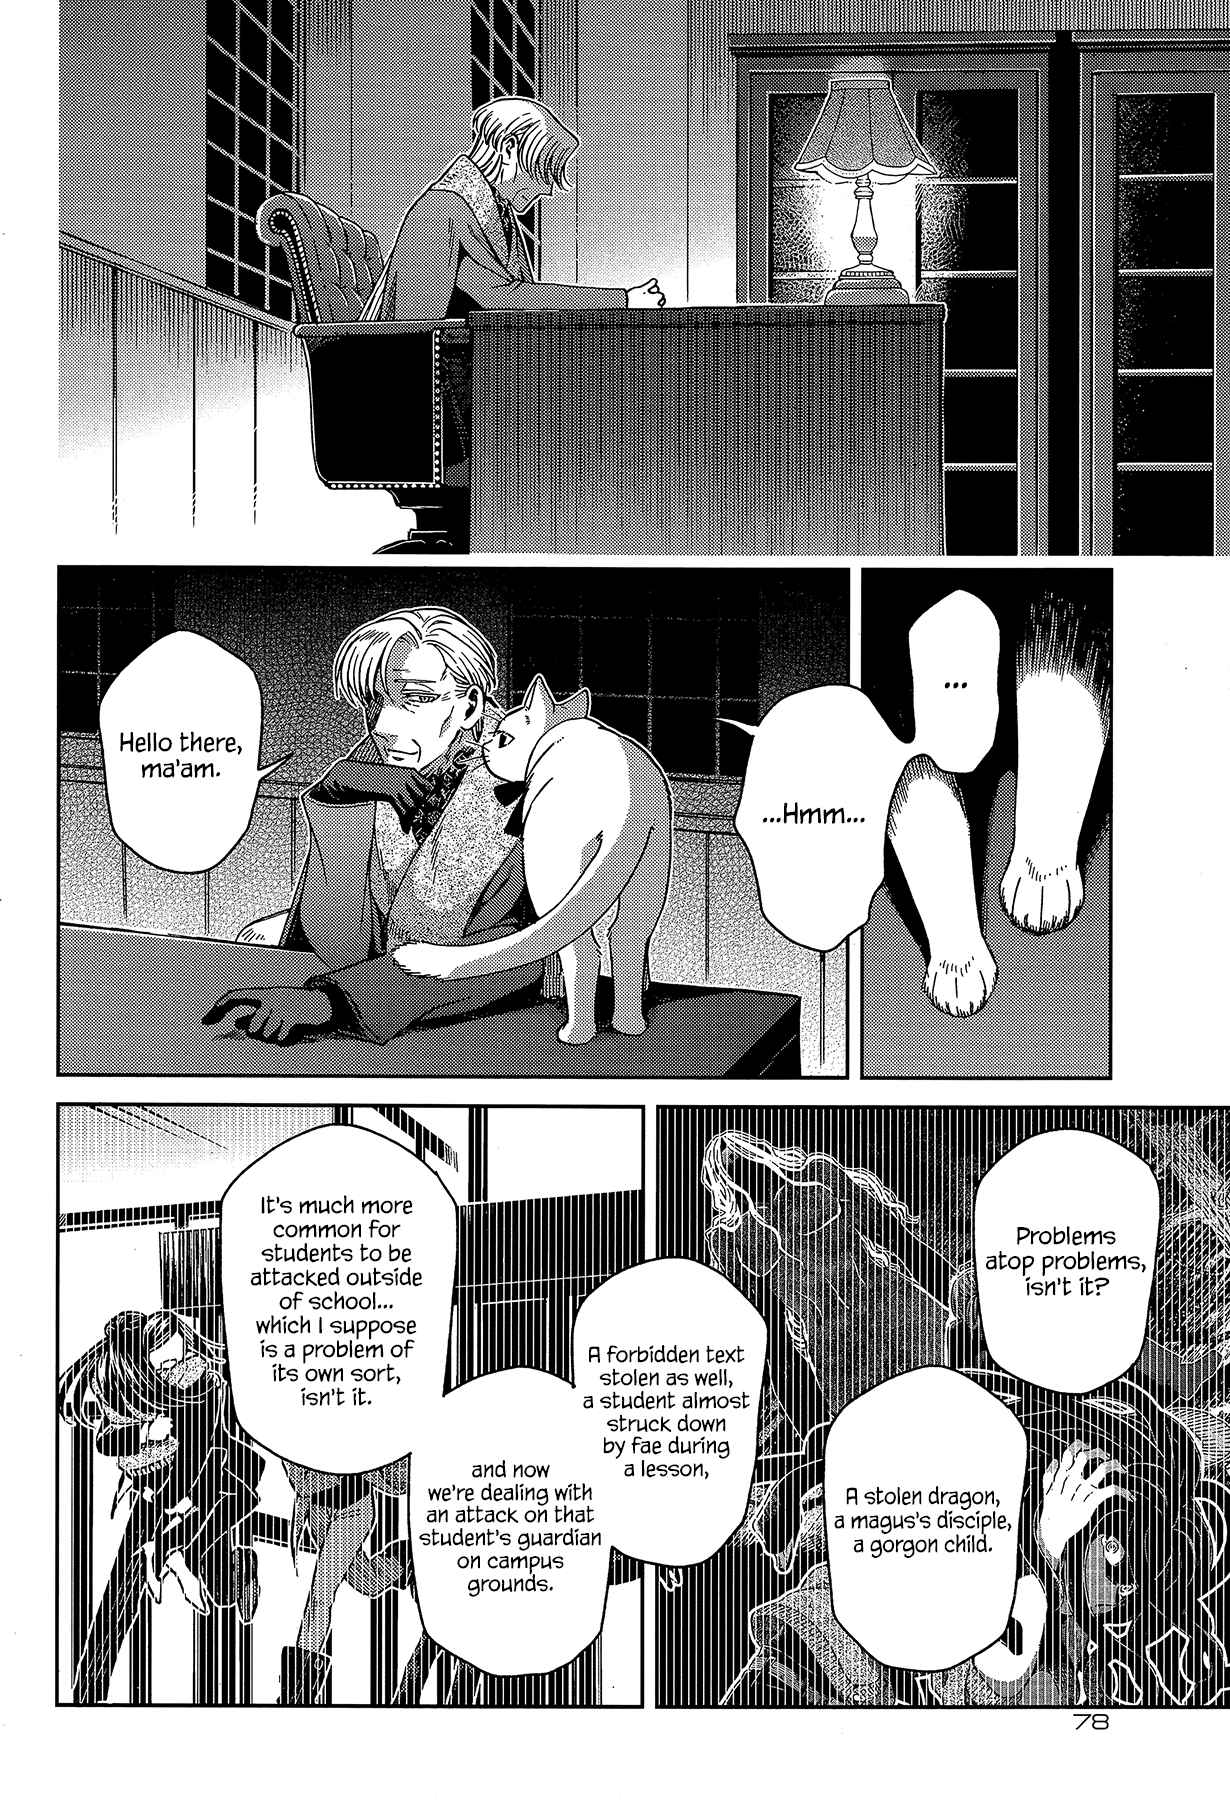 The Ancient Magus' Bride Vol. 13 Ch. 66 A small leak will sink a great ship I